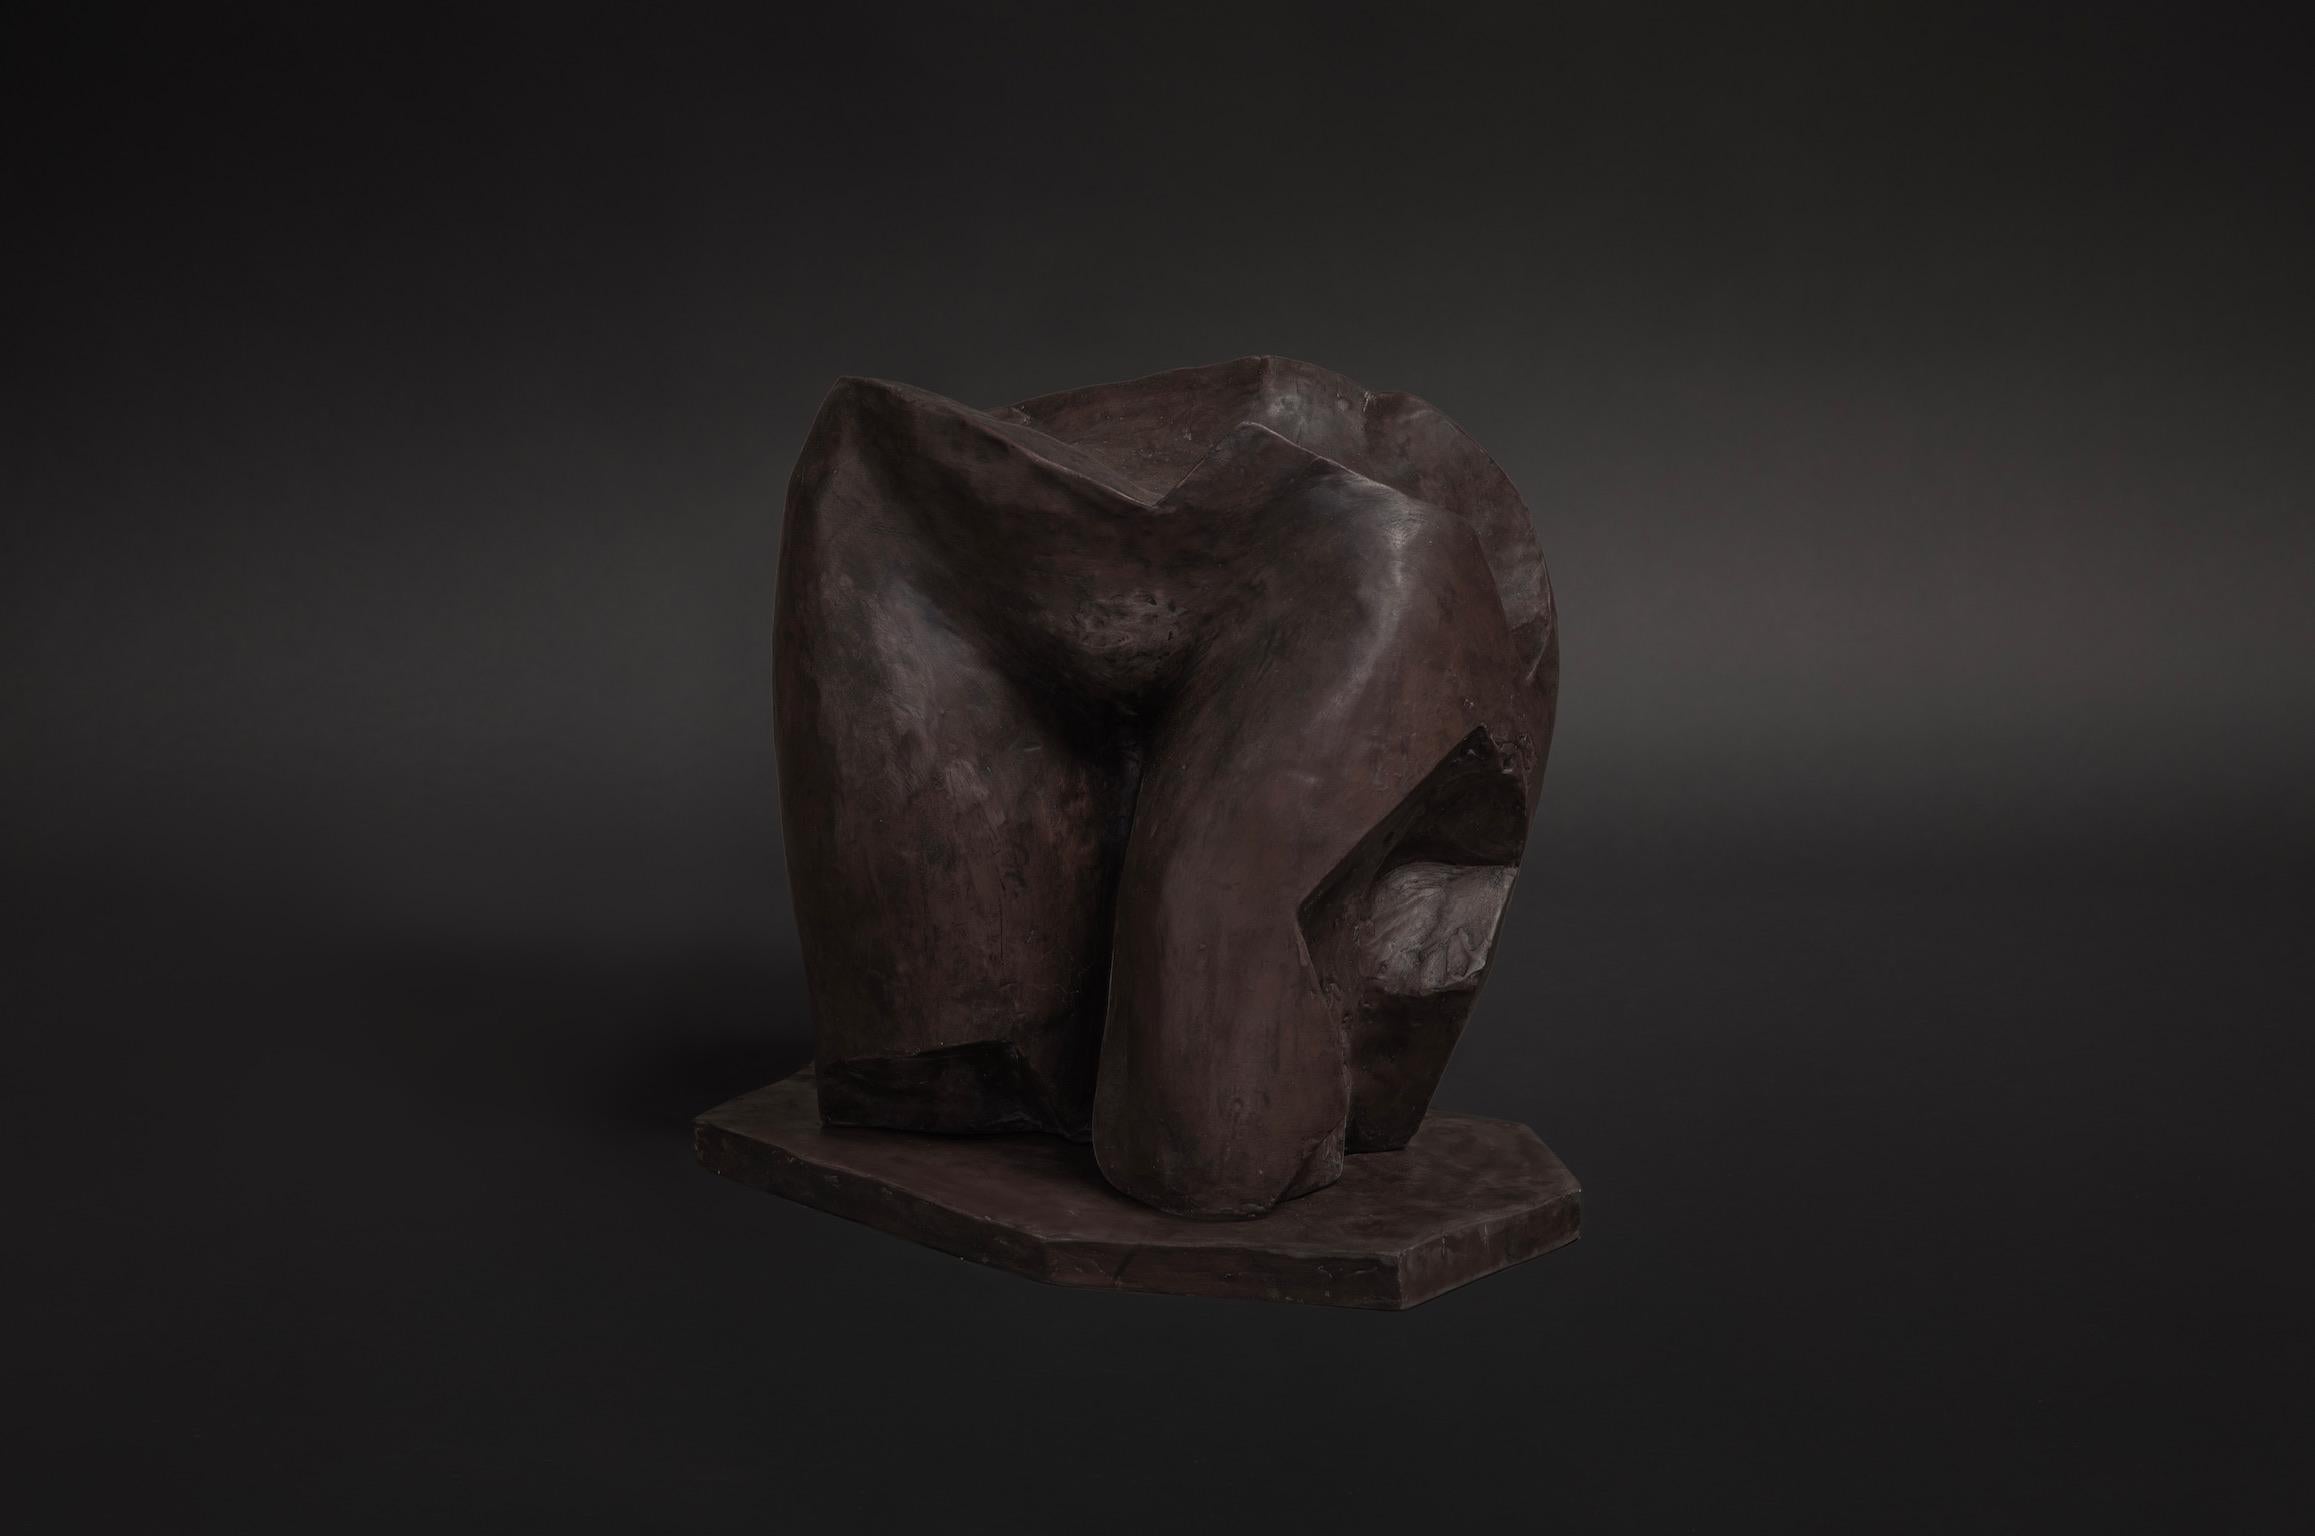 In continuity with her signature explorations of the female form, Marcela Cure introduces a new sculptural memento that sheds light upon the mulling yet beauteous intricacies in womanhood. Through hand-sculpted and hand-cast fragment, Cure